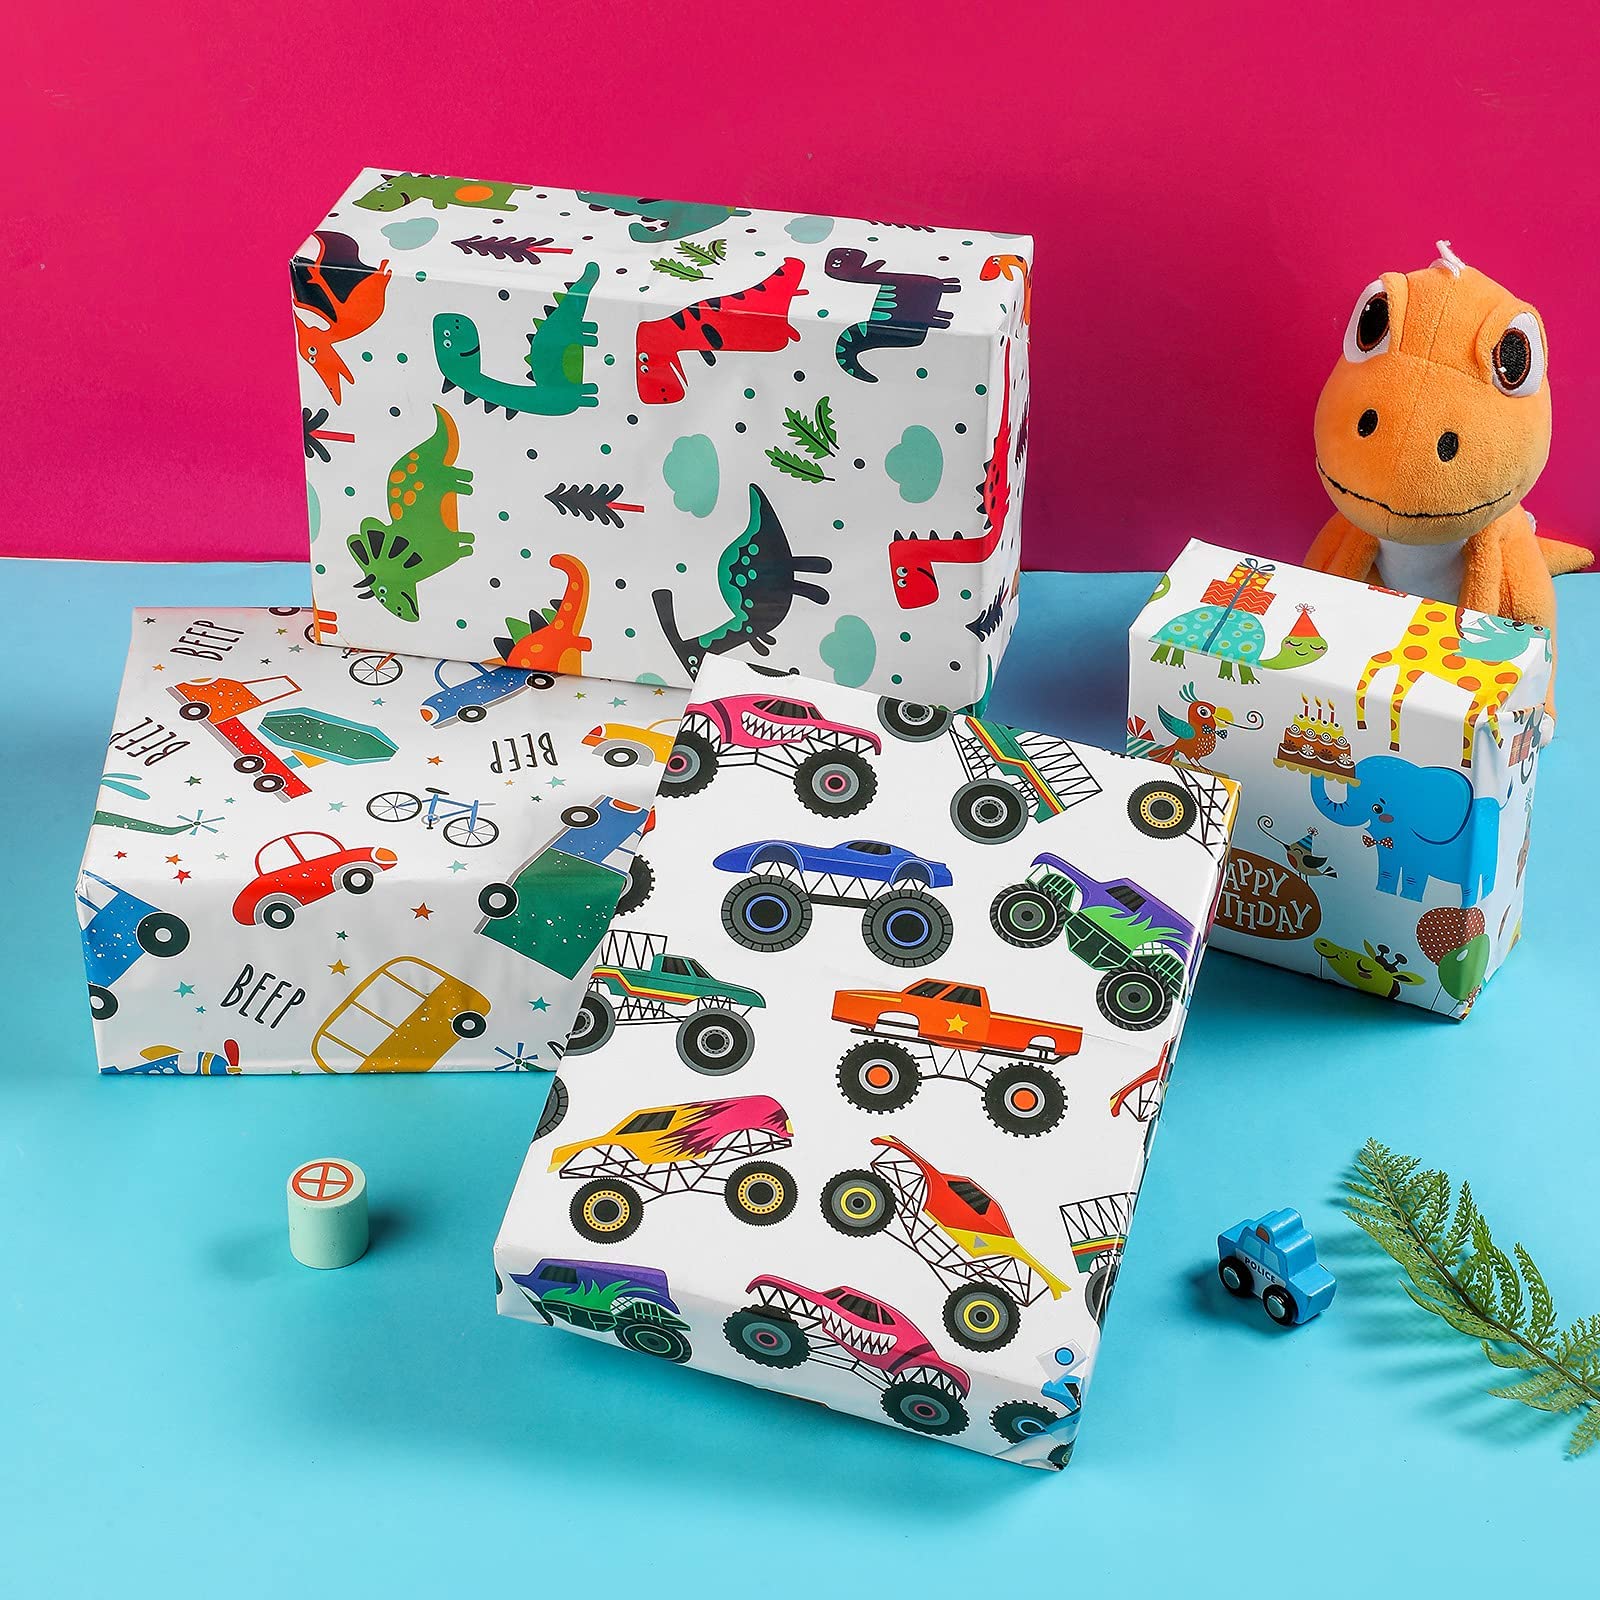 BULKYTREE Birthday Wrapping Paper for Boys Kids, 12 Sheets Dinosaur, Monster Truck, Happy Animals Design Gift Wrap for Kids Birthday, Baby Shower and Holiday - 20 x 29 Inch Per Sheet